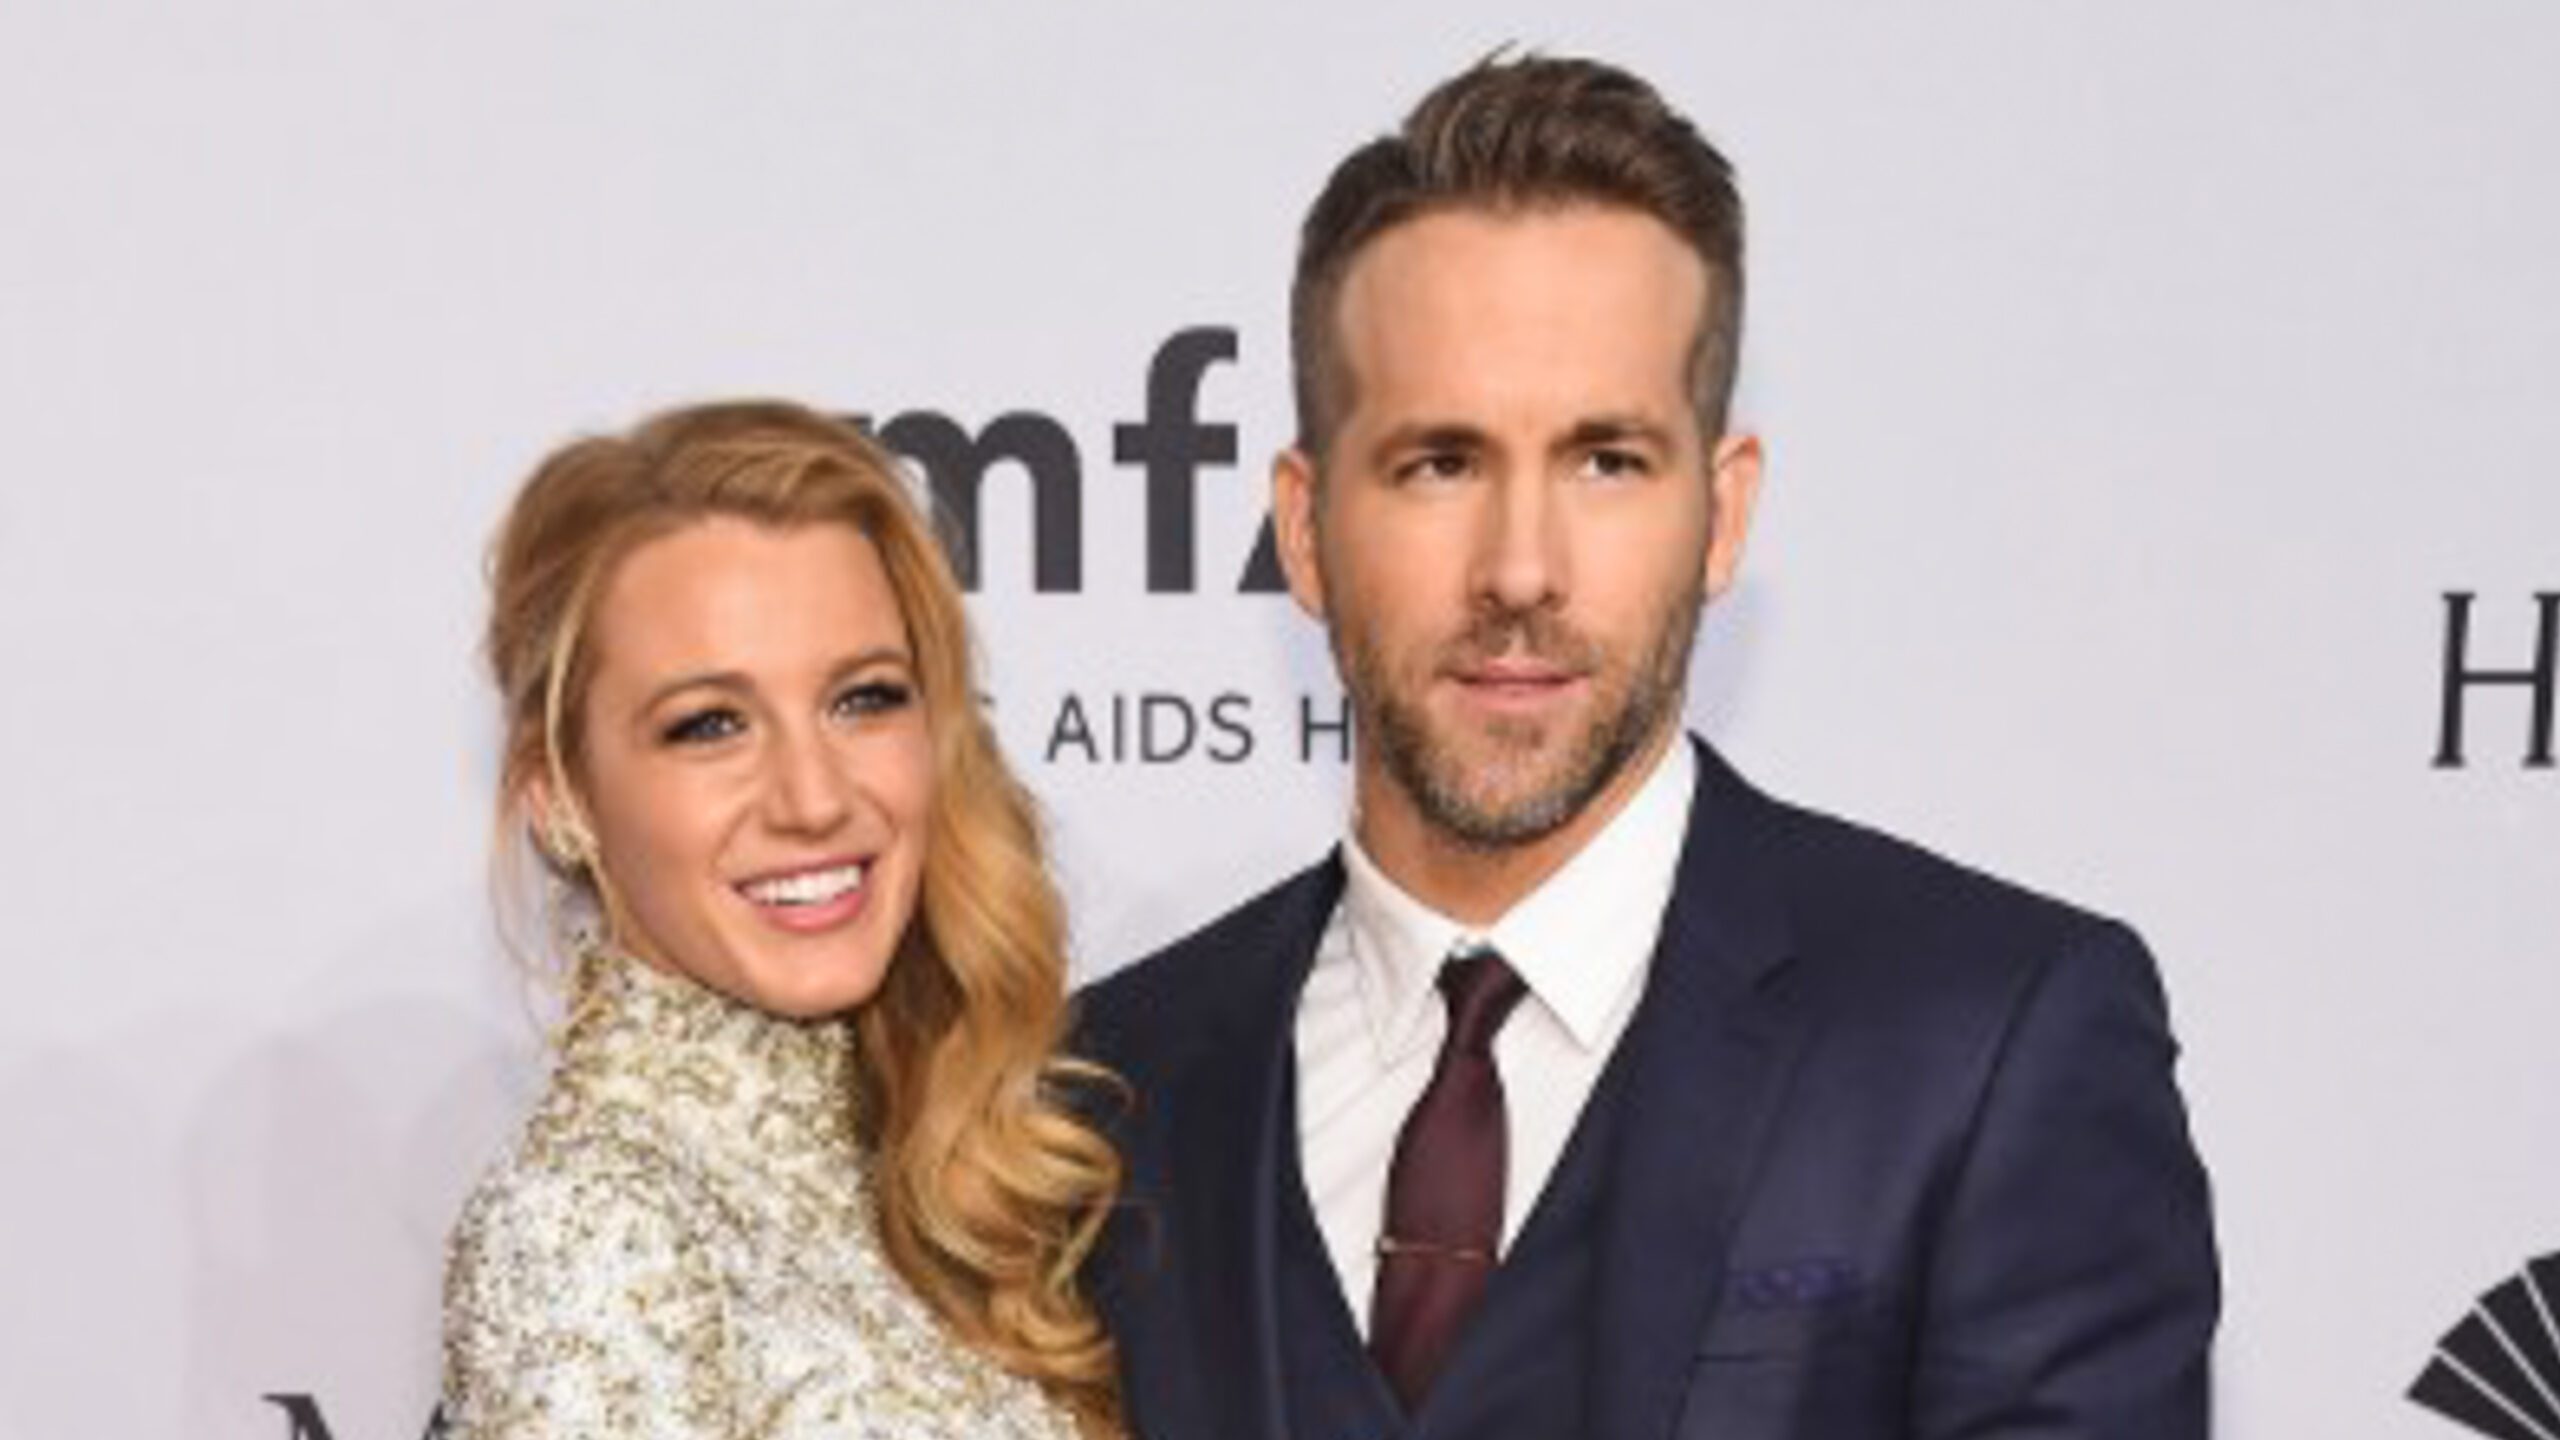 Ryan Reynolds reveals the moment he knew Blake Lively was the one